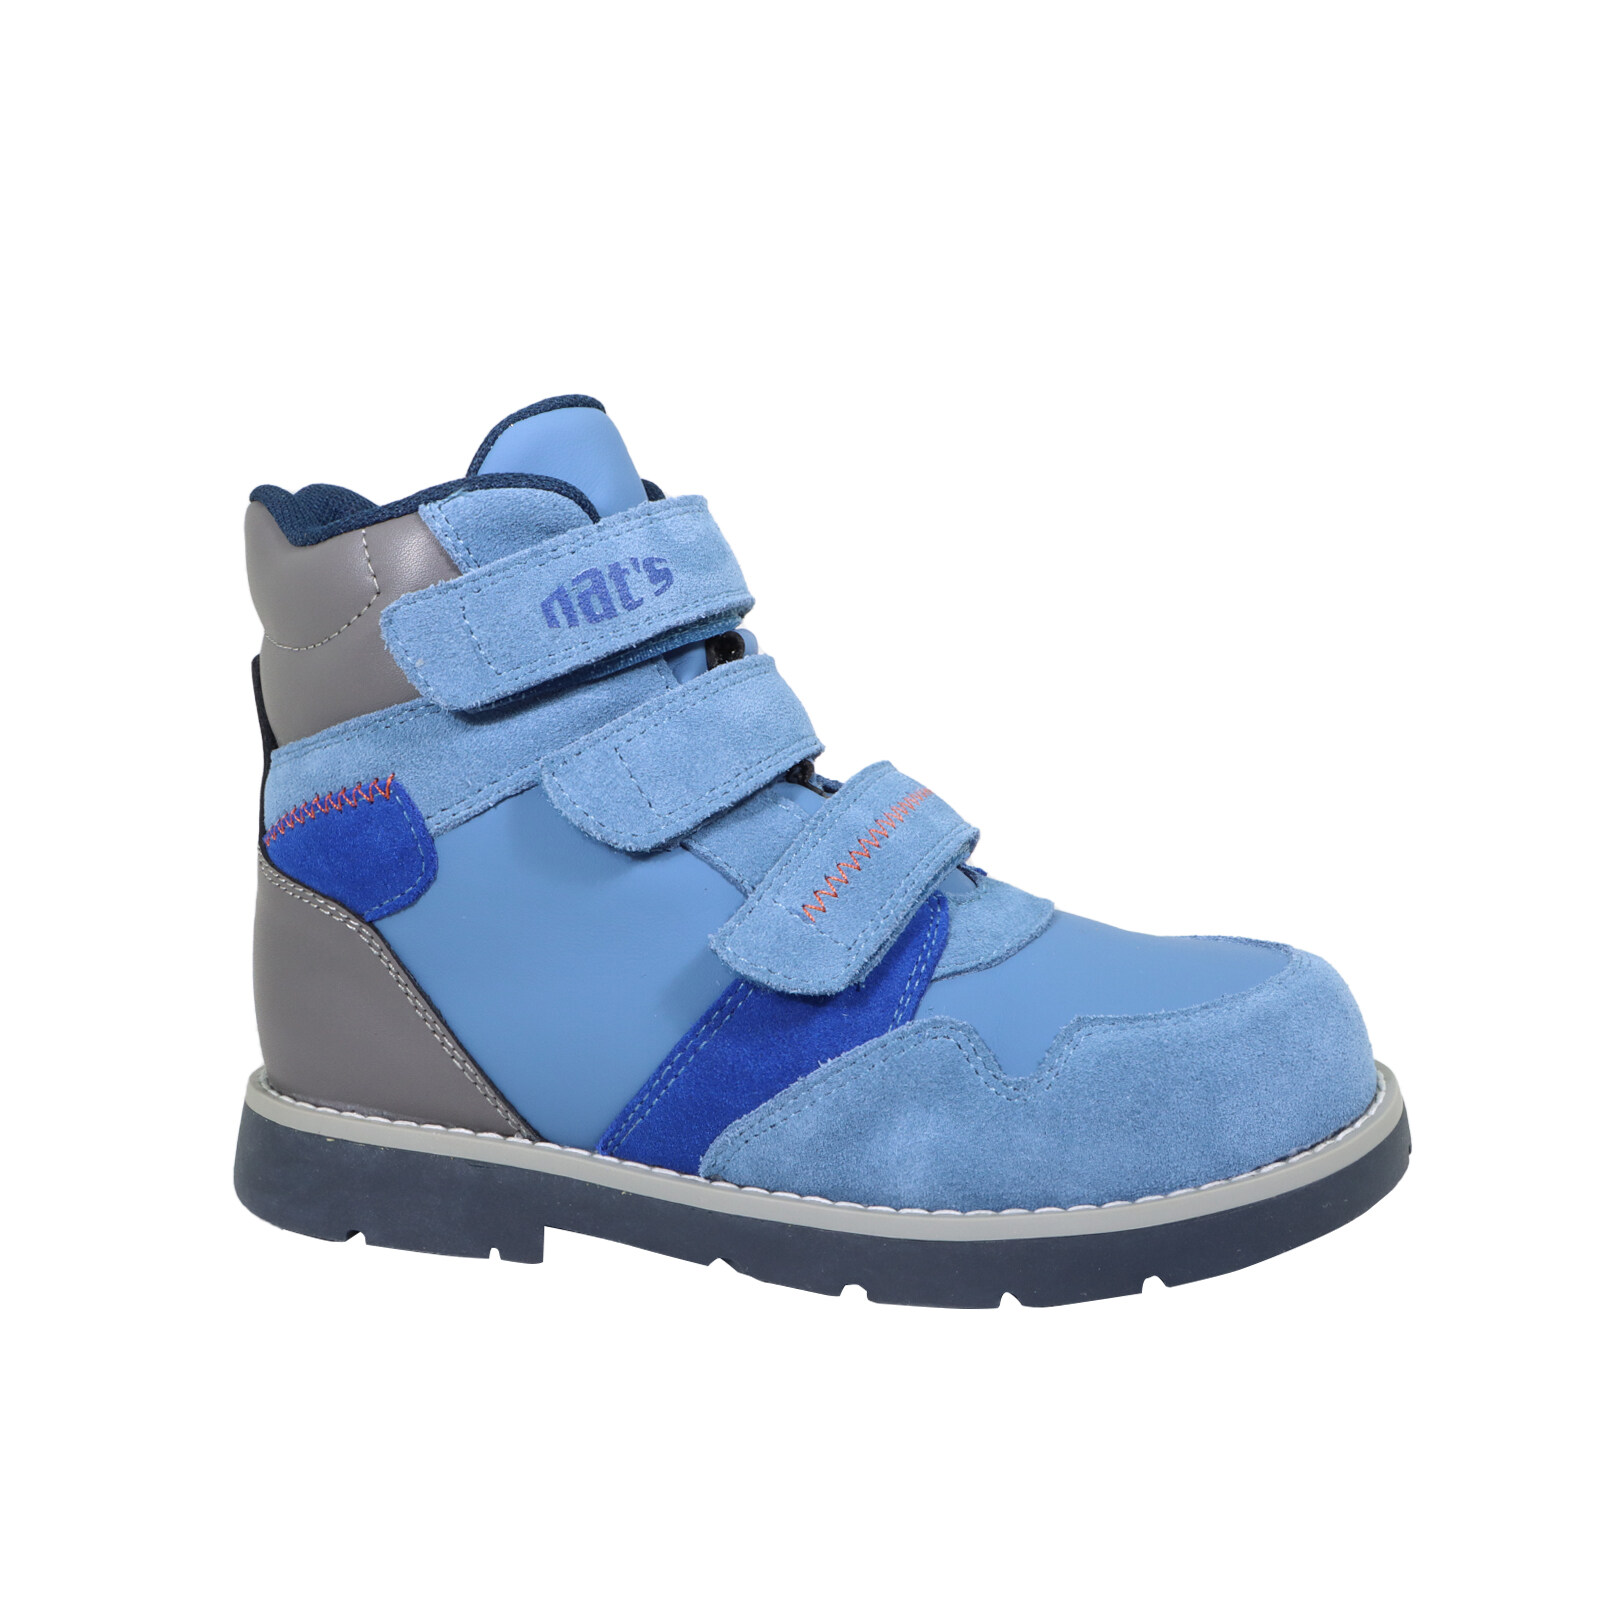 Customized comfort Orthopaedic Shoes for children